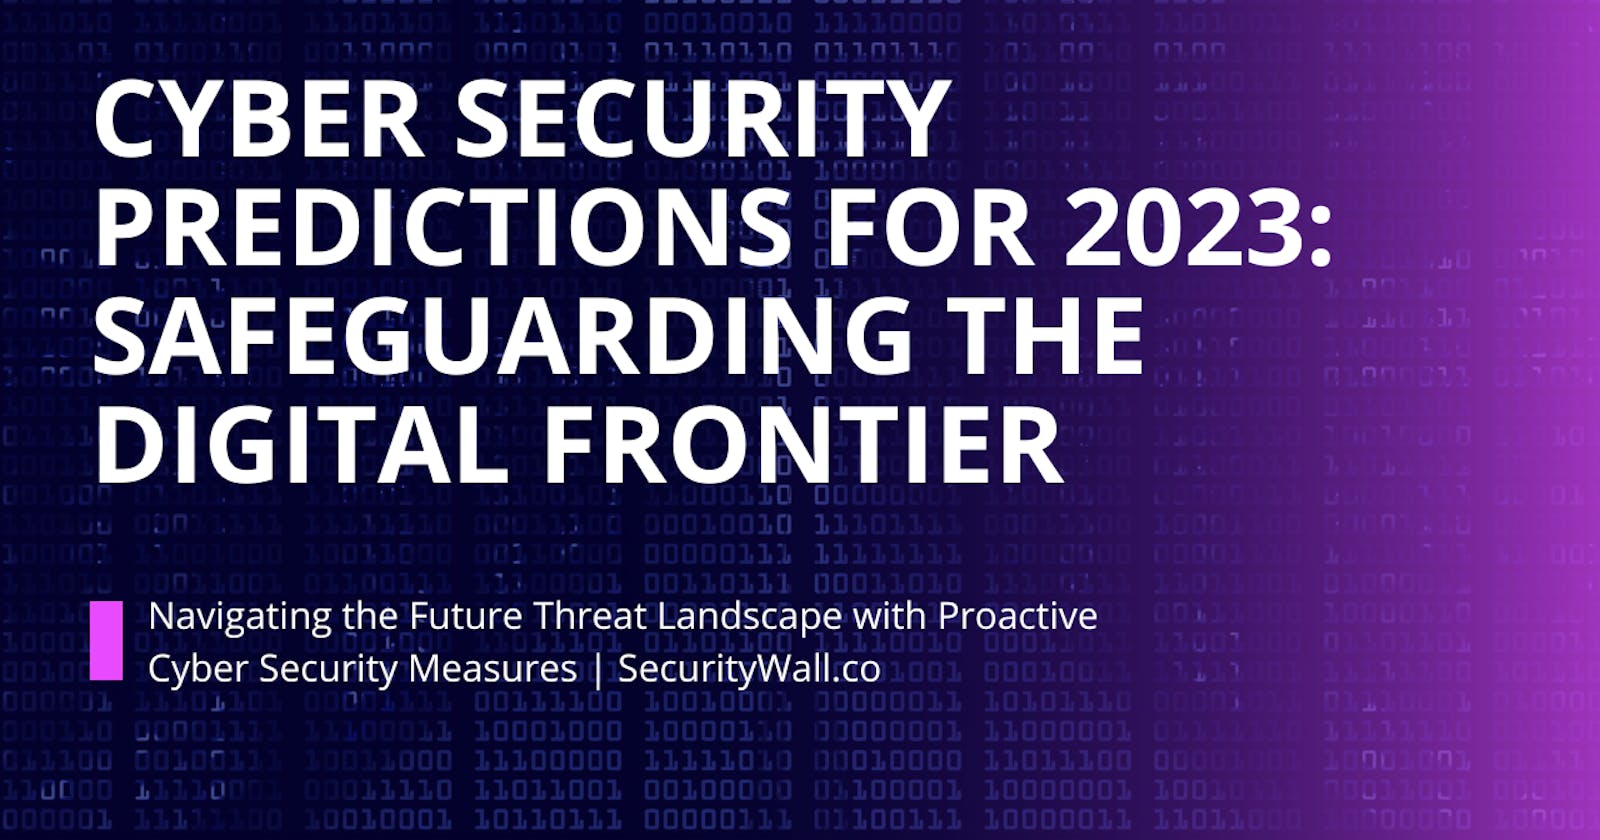 Cyber Security Predictions for 2023: Safeguarding the Digital Frontier